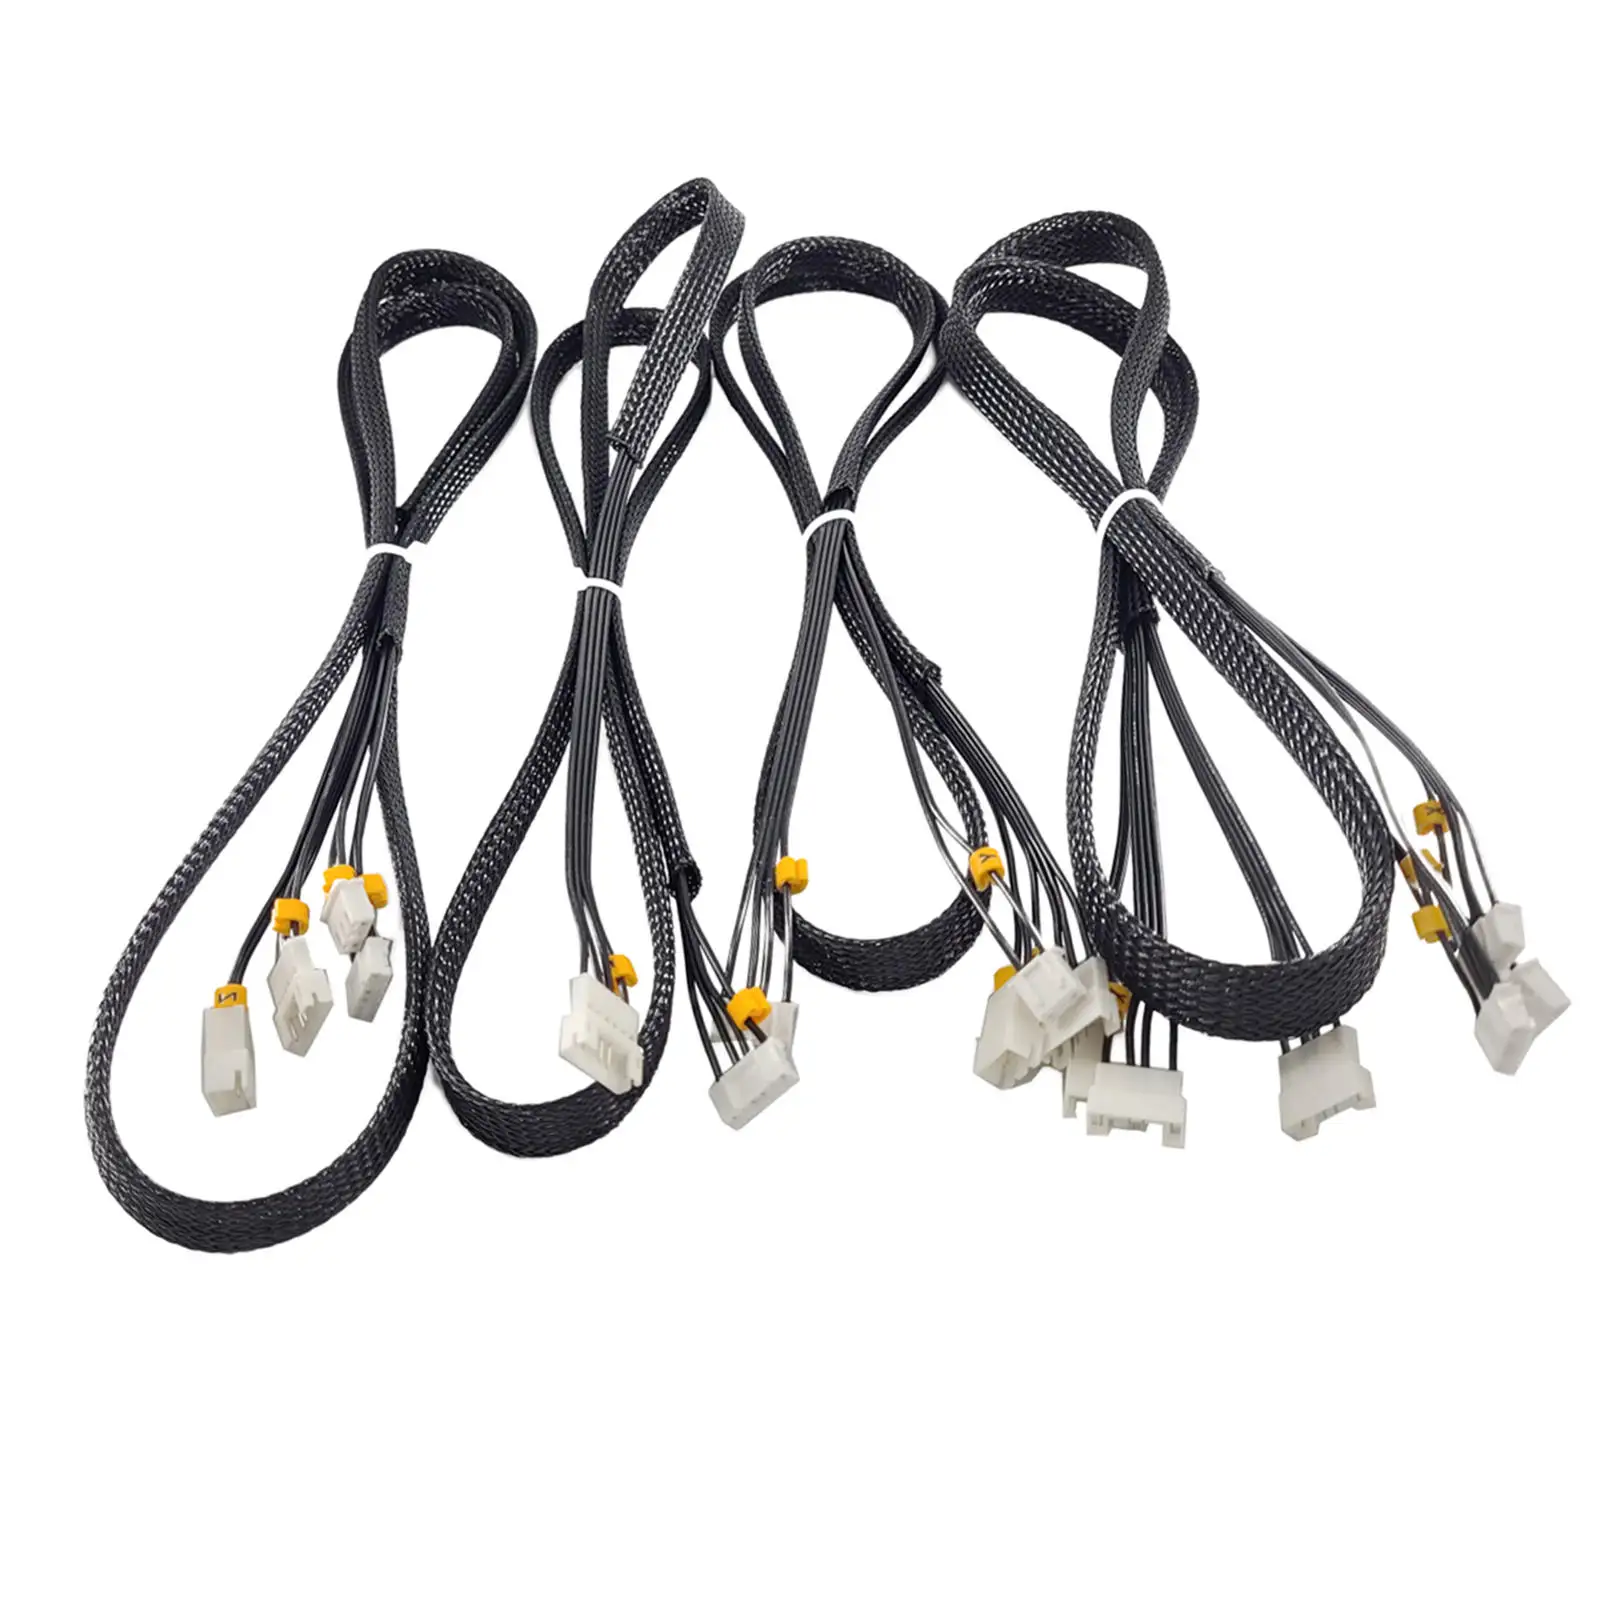 XYZZ  Stepper Motor Limit Switch Cables for Ender-3 Ender-5 CR-10 /S4/S5